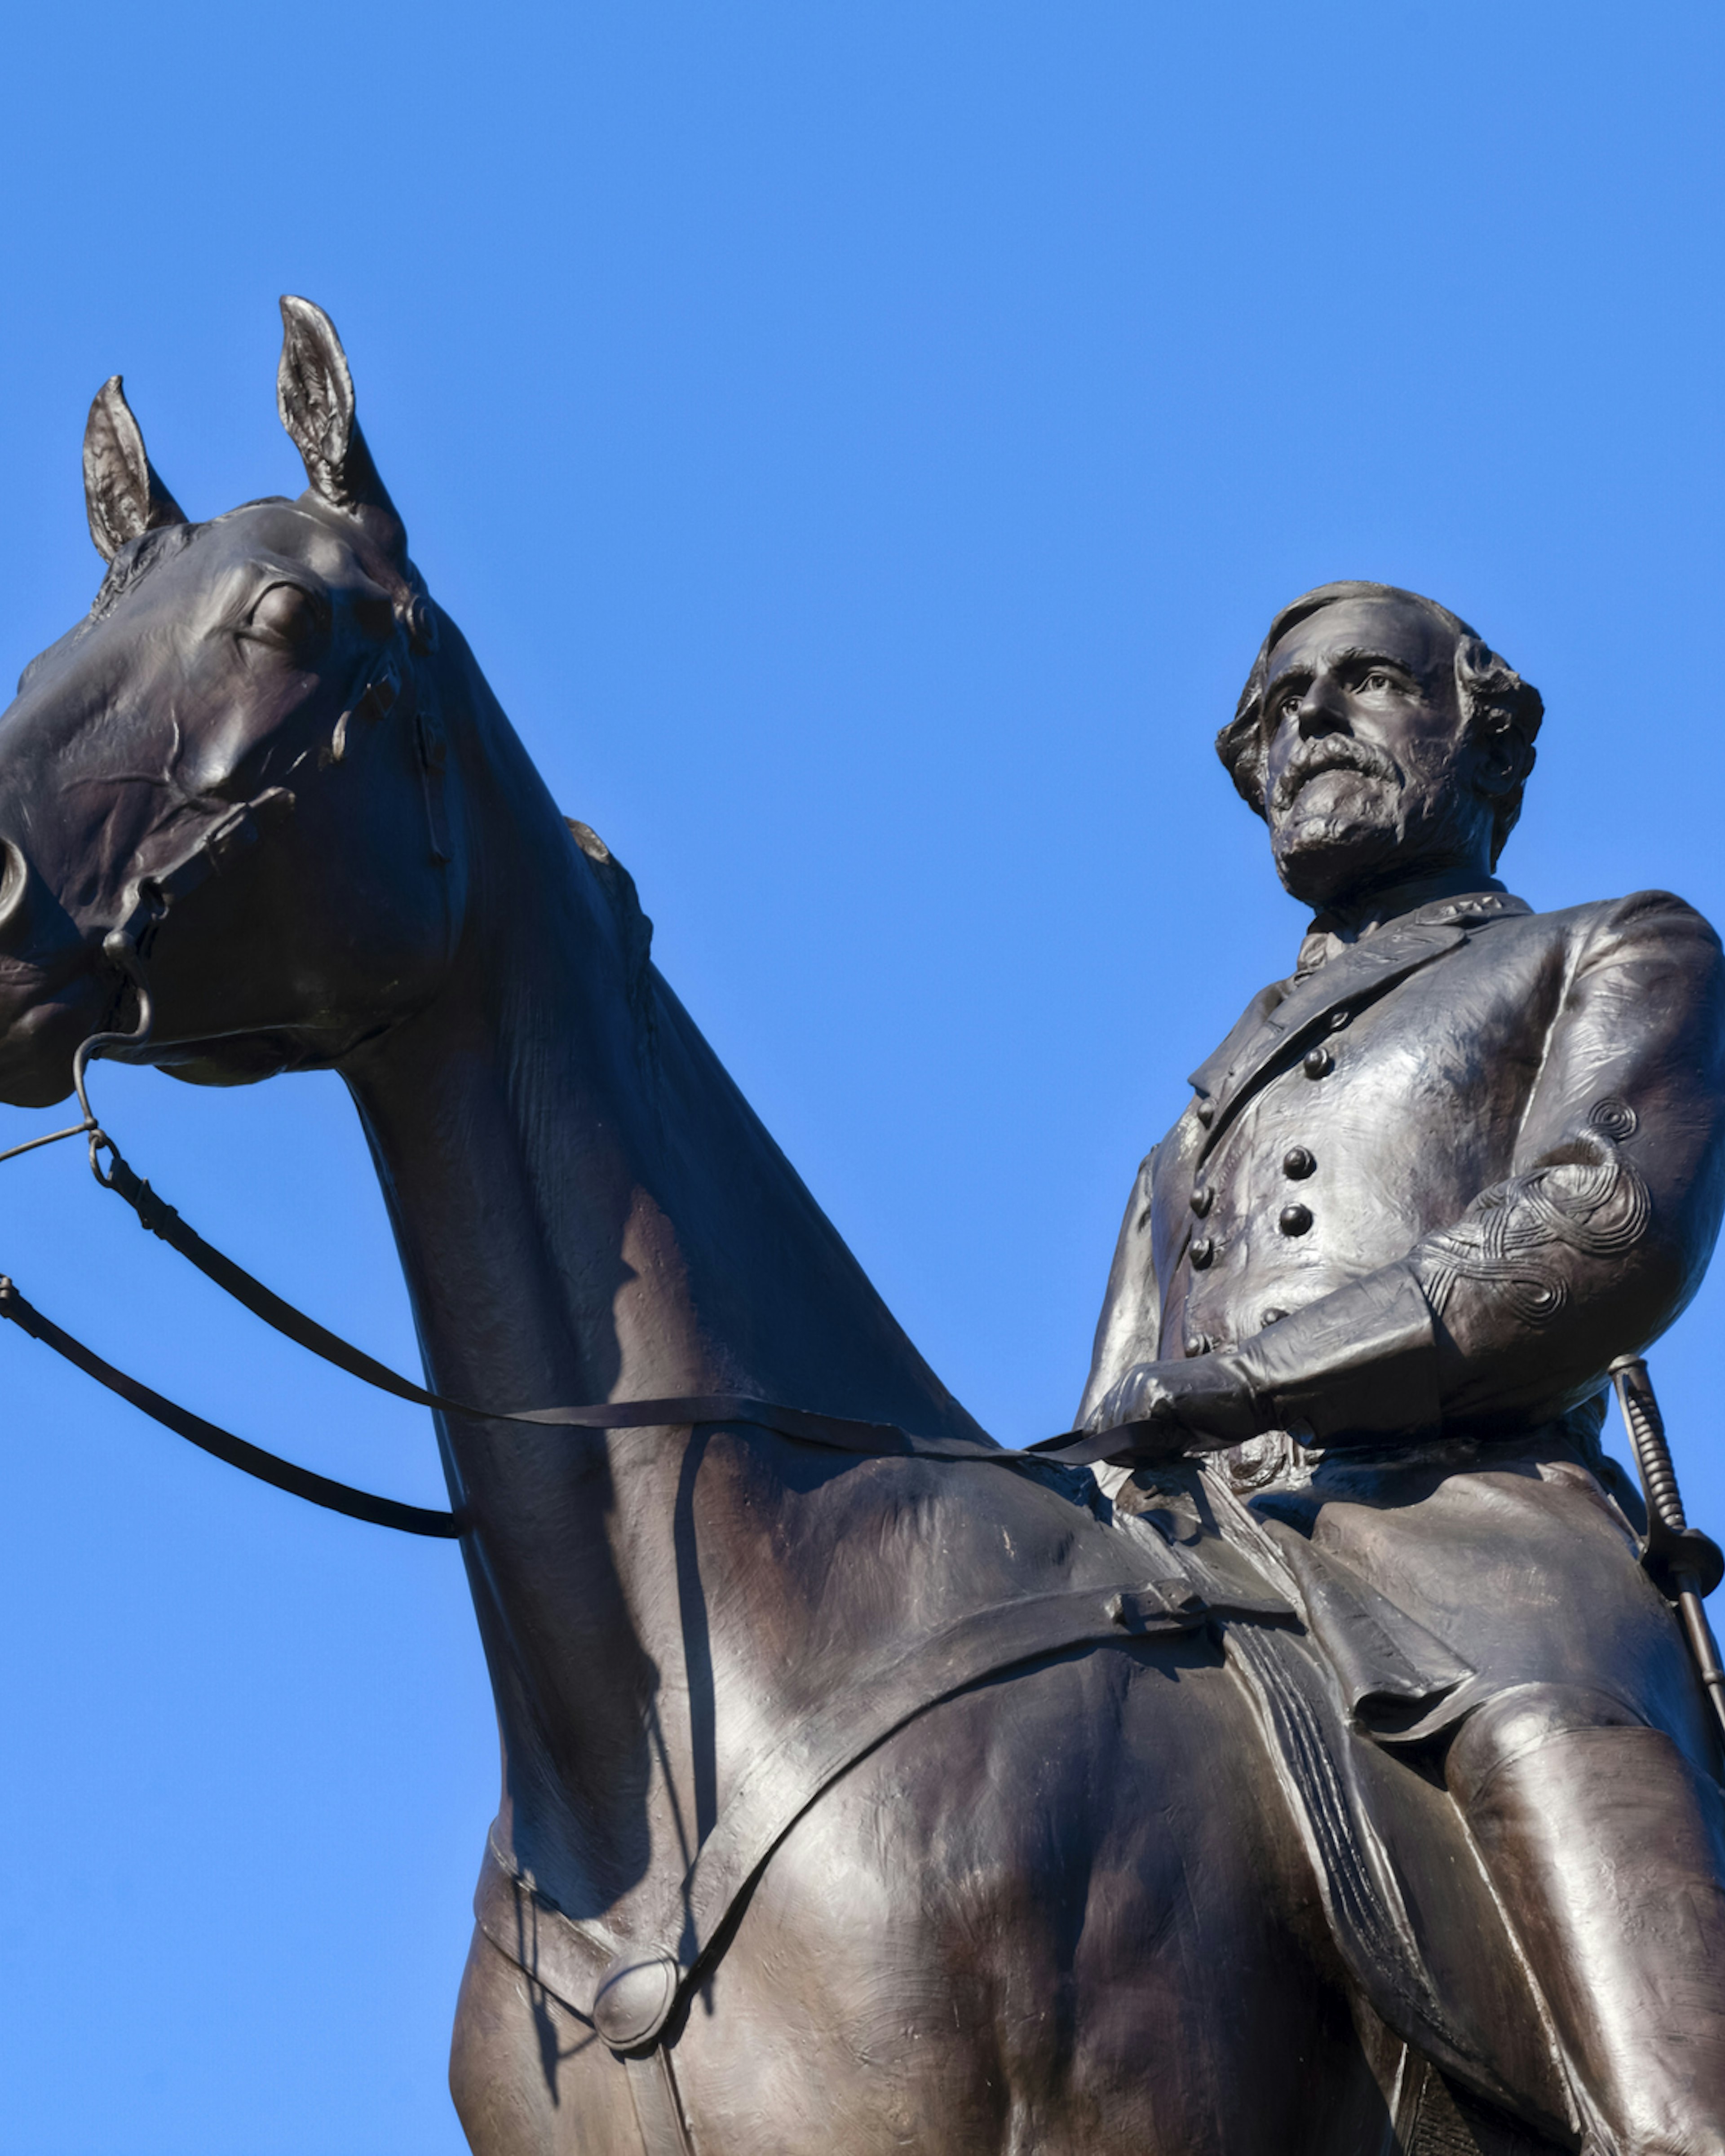 The Virginia Memorial at the Gettysburg National Battlefield. Dedicated in June 6, 1917, the monument features General Robert E Lee mounted on his horse "Traveller". Sculptor is F. W. Sievers.